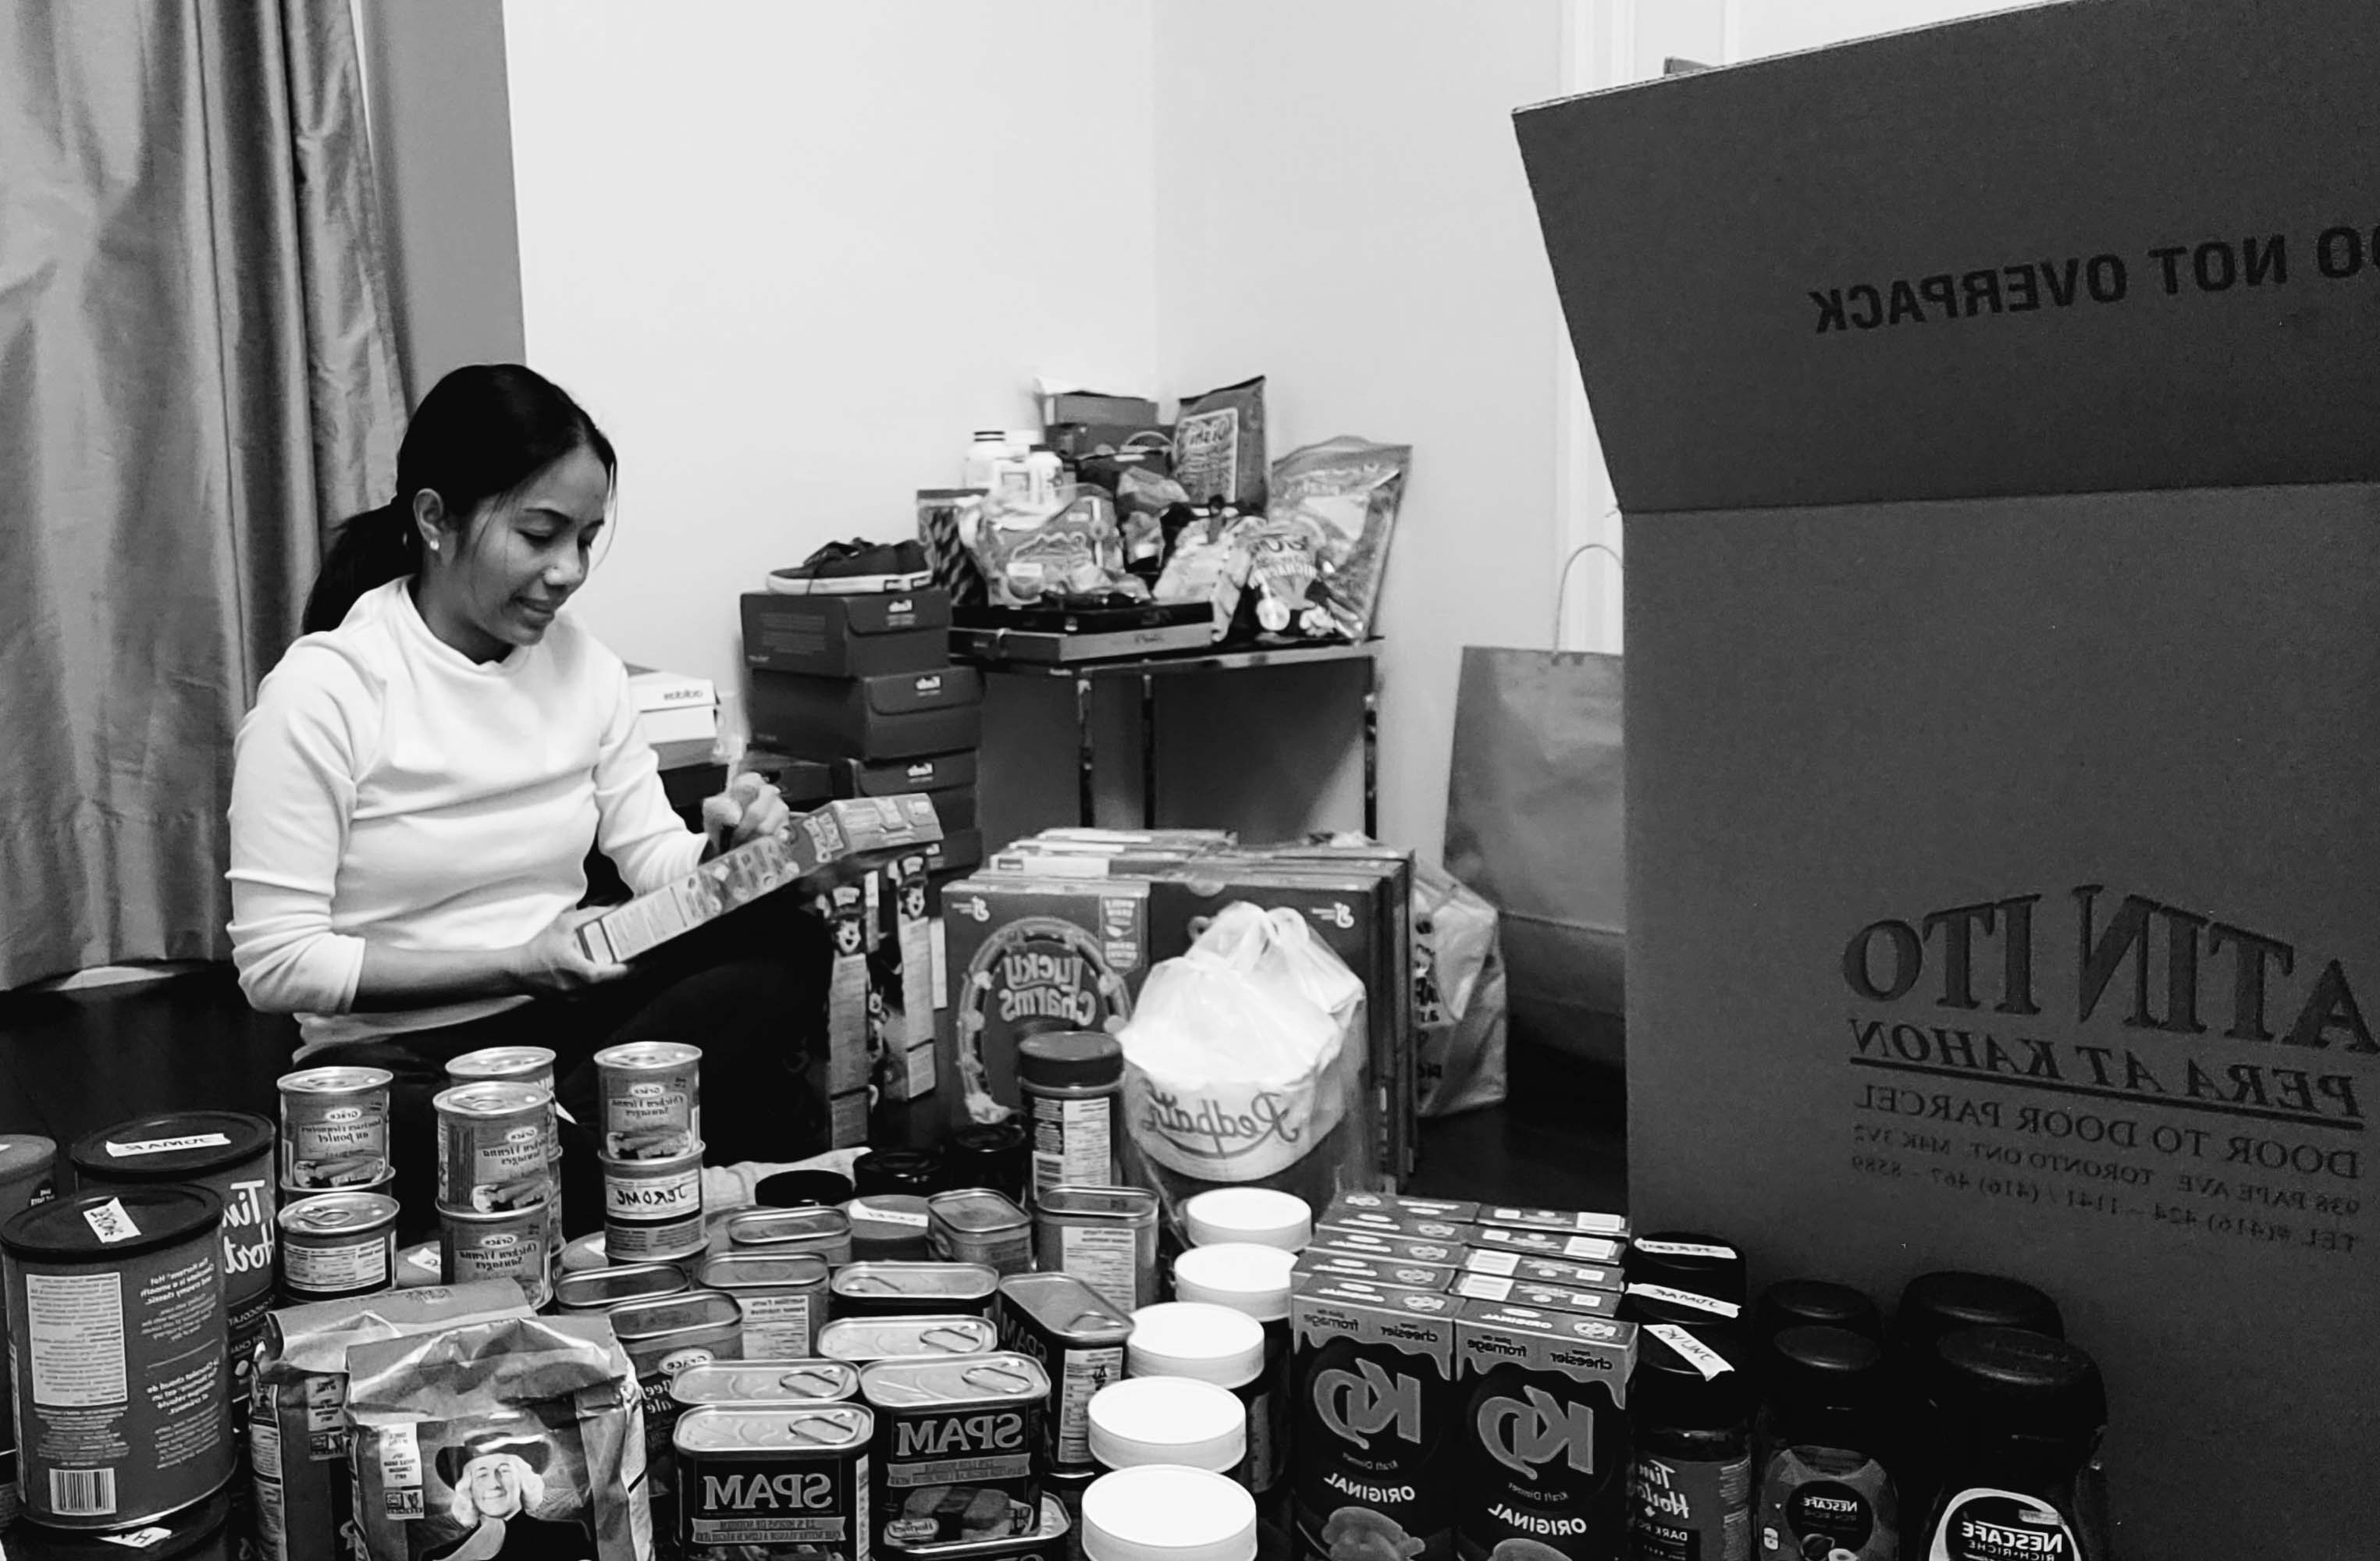 Woman packing food (cans, boxes etc) into a box